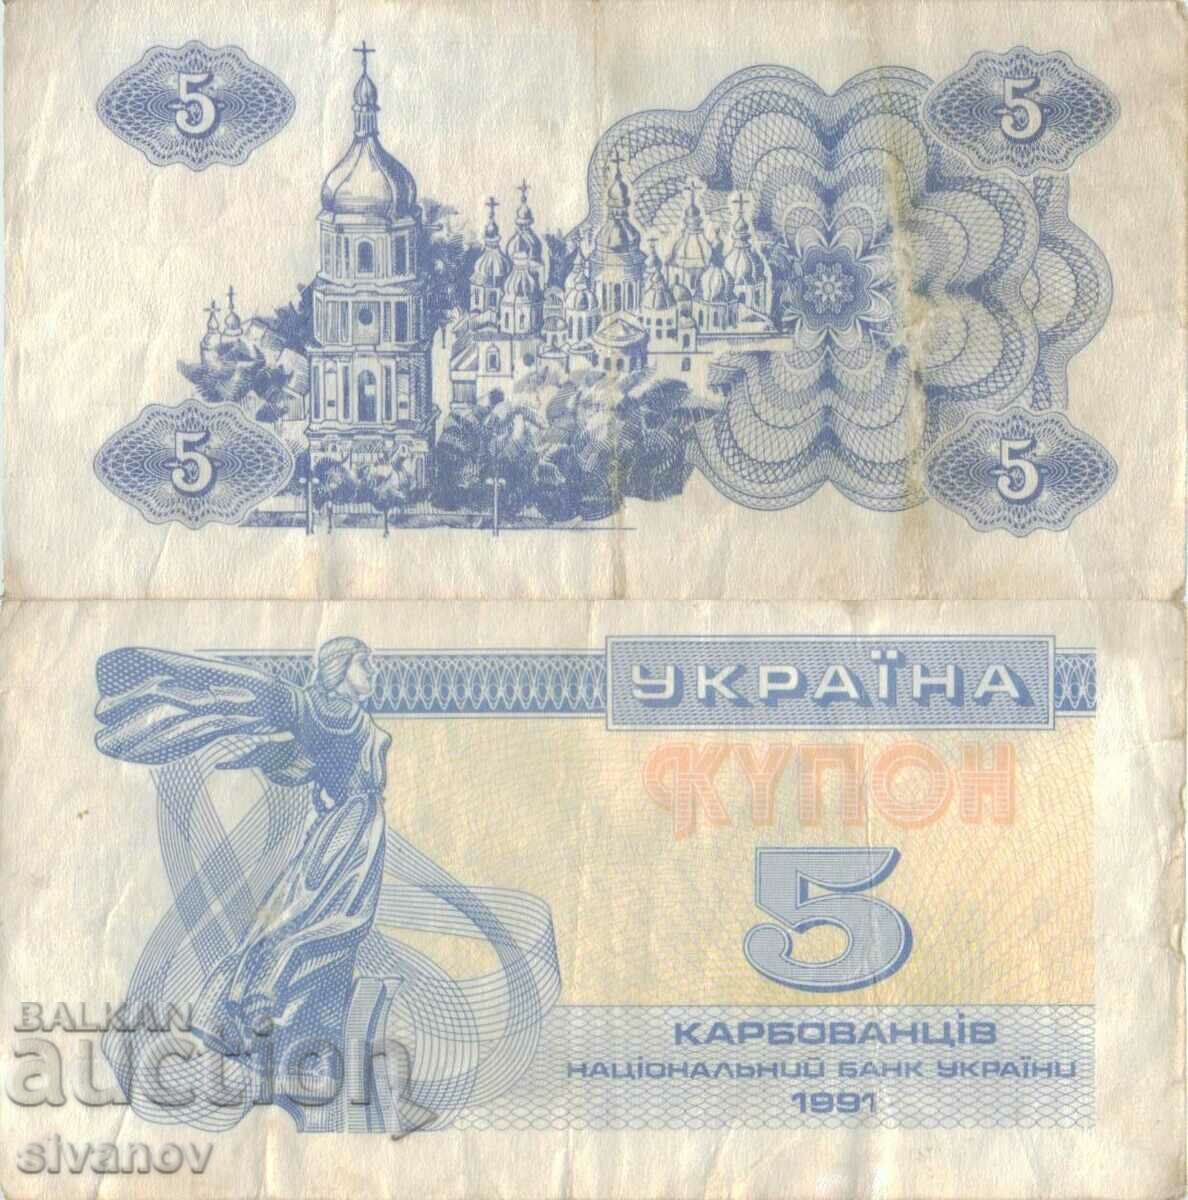 Ukraine 5 coupon karbovanets 1991 #4839